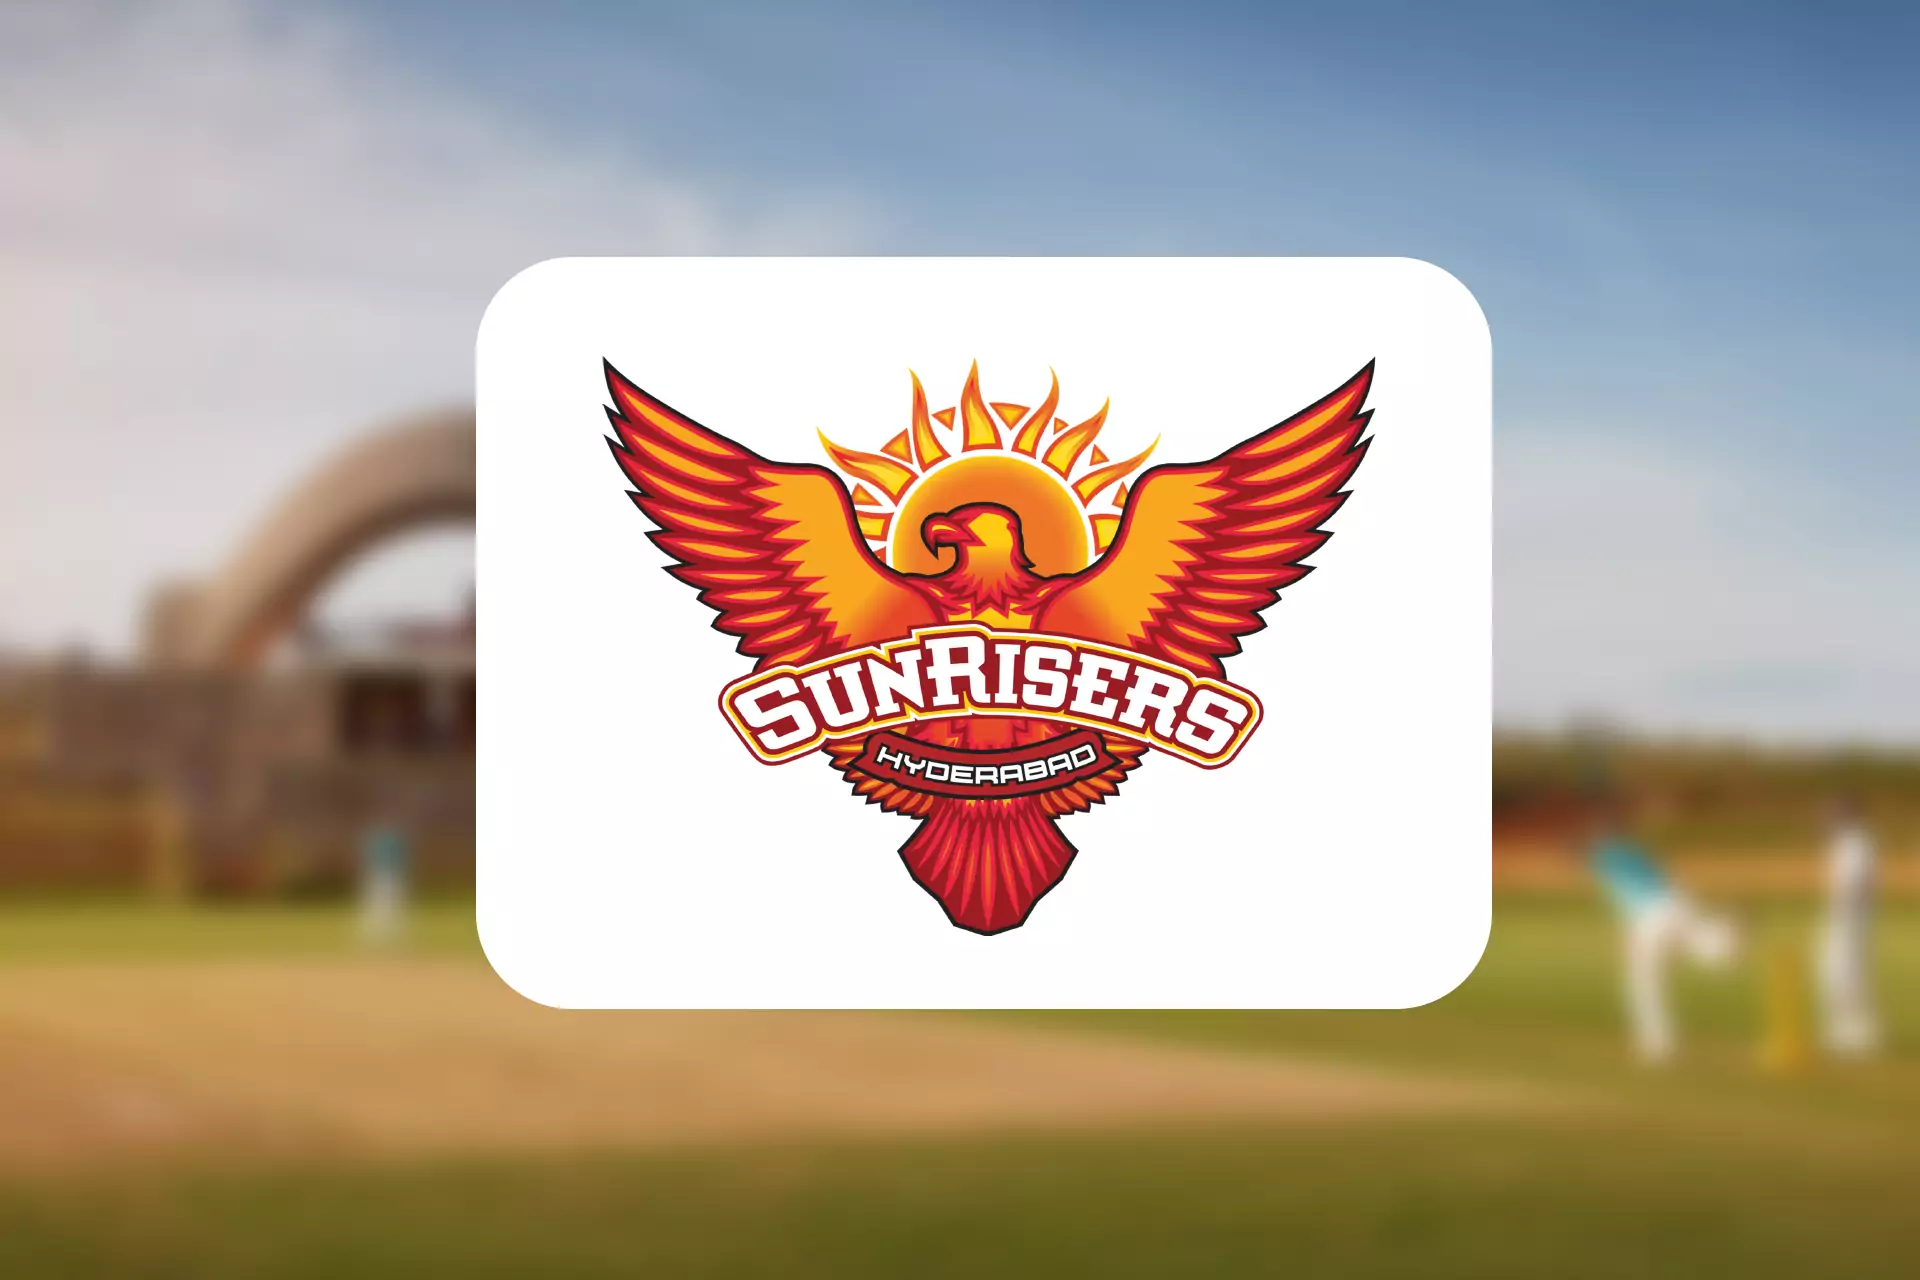 SunRisers Hyderabad won the IPL only once.